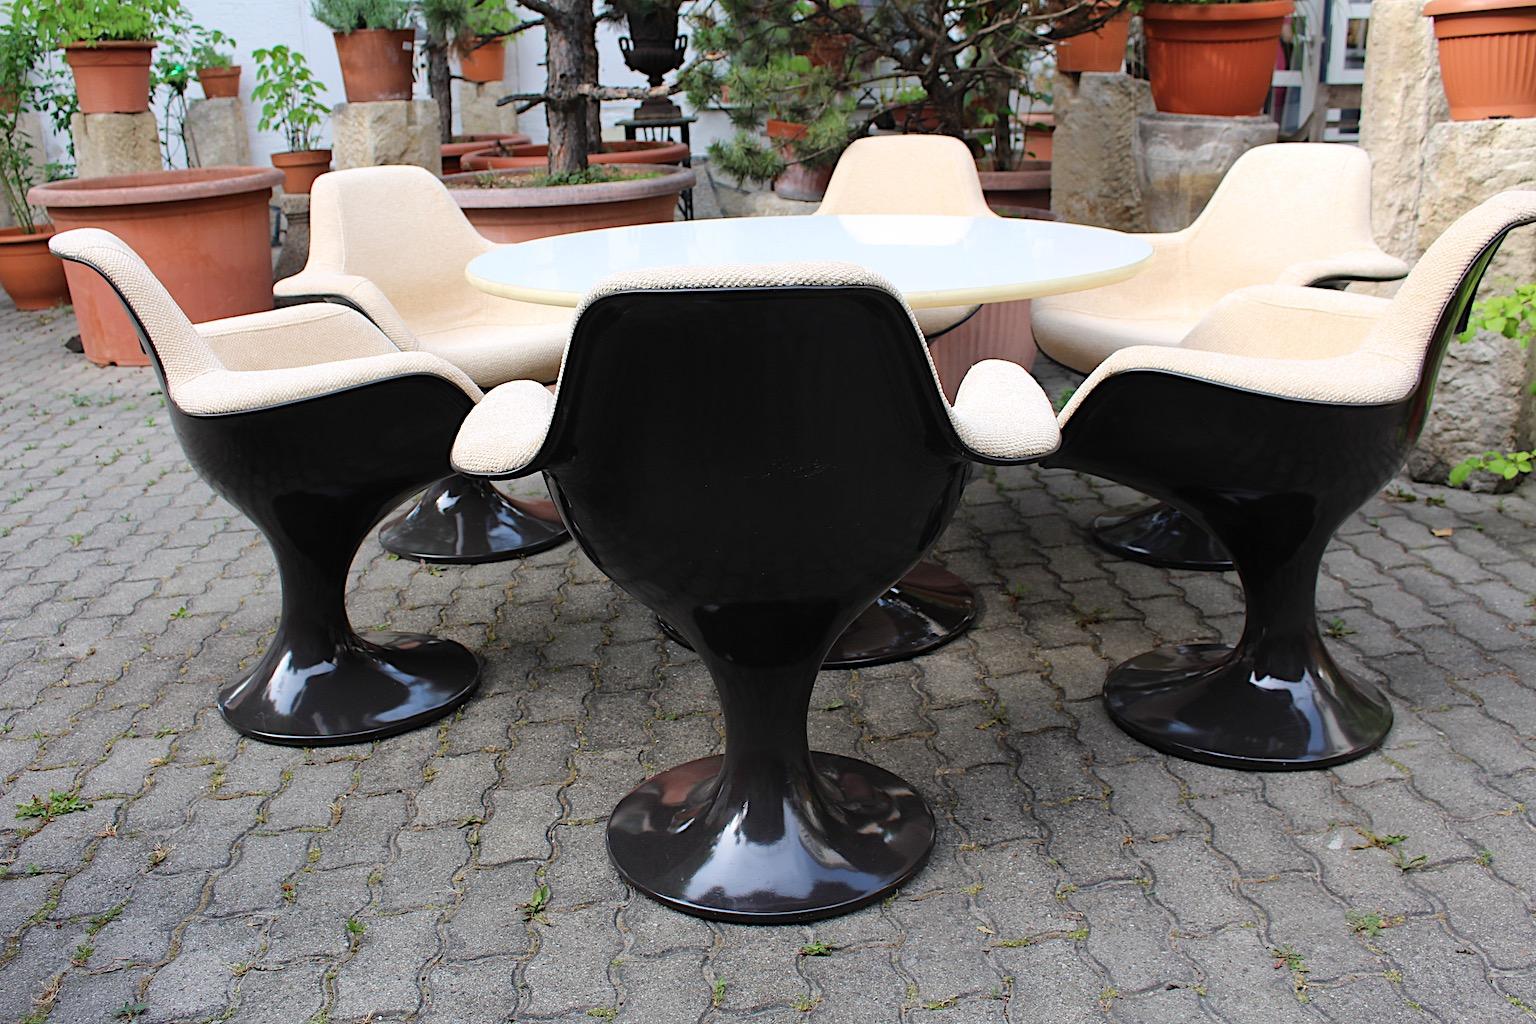 Late 20th Century Space Age Brown Plastic Dining Room Set Markus Farner Walter Grunder 1970s  For Sale